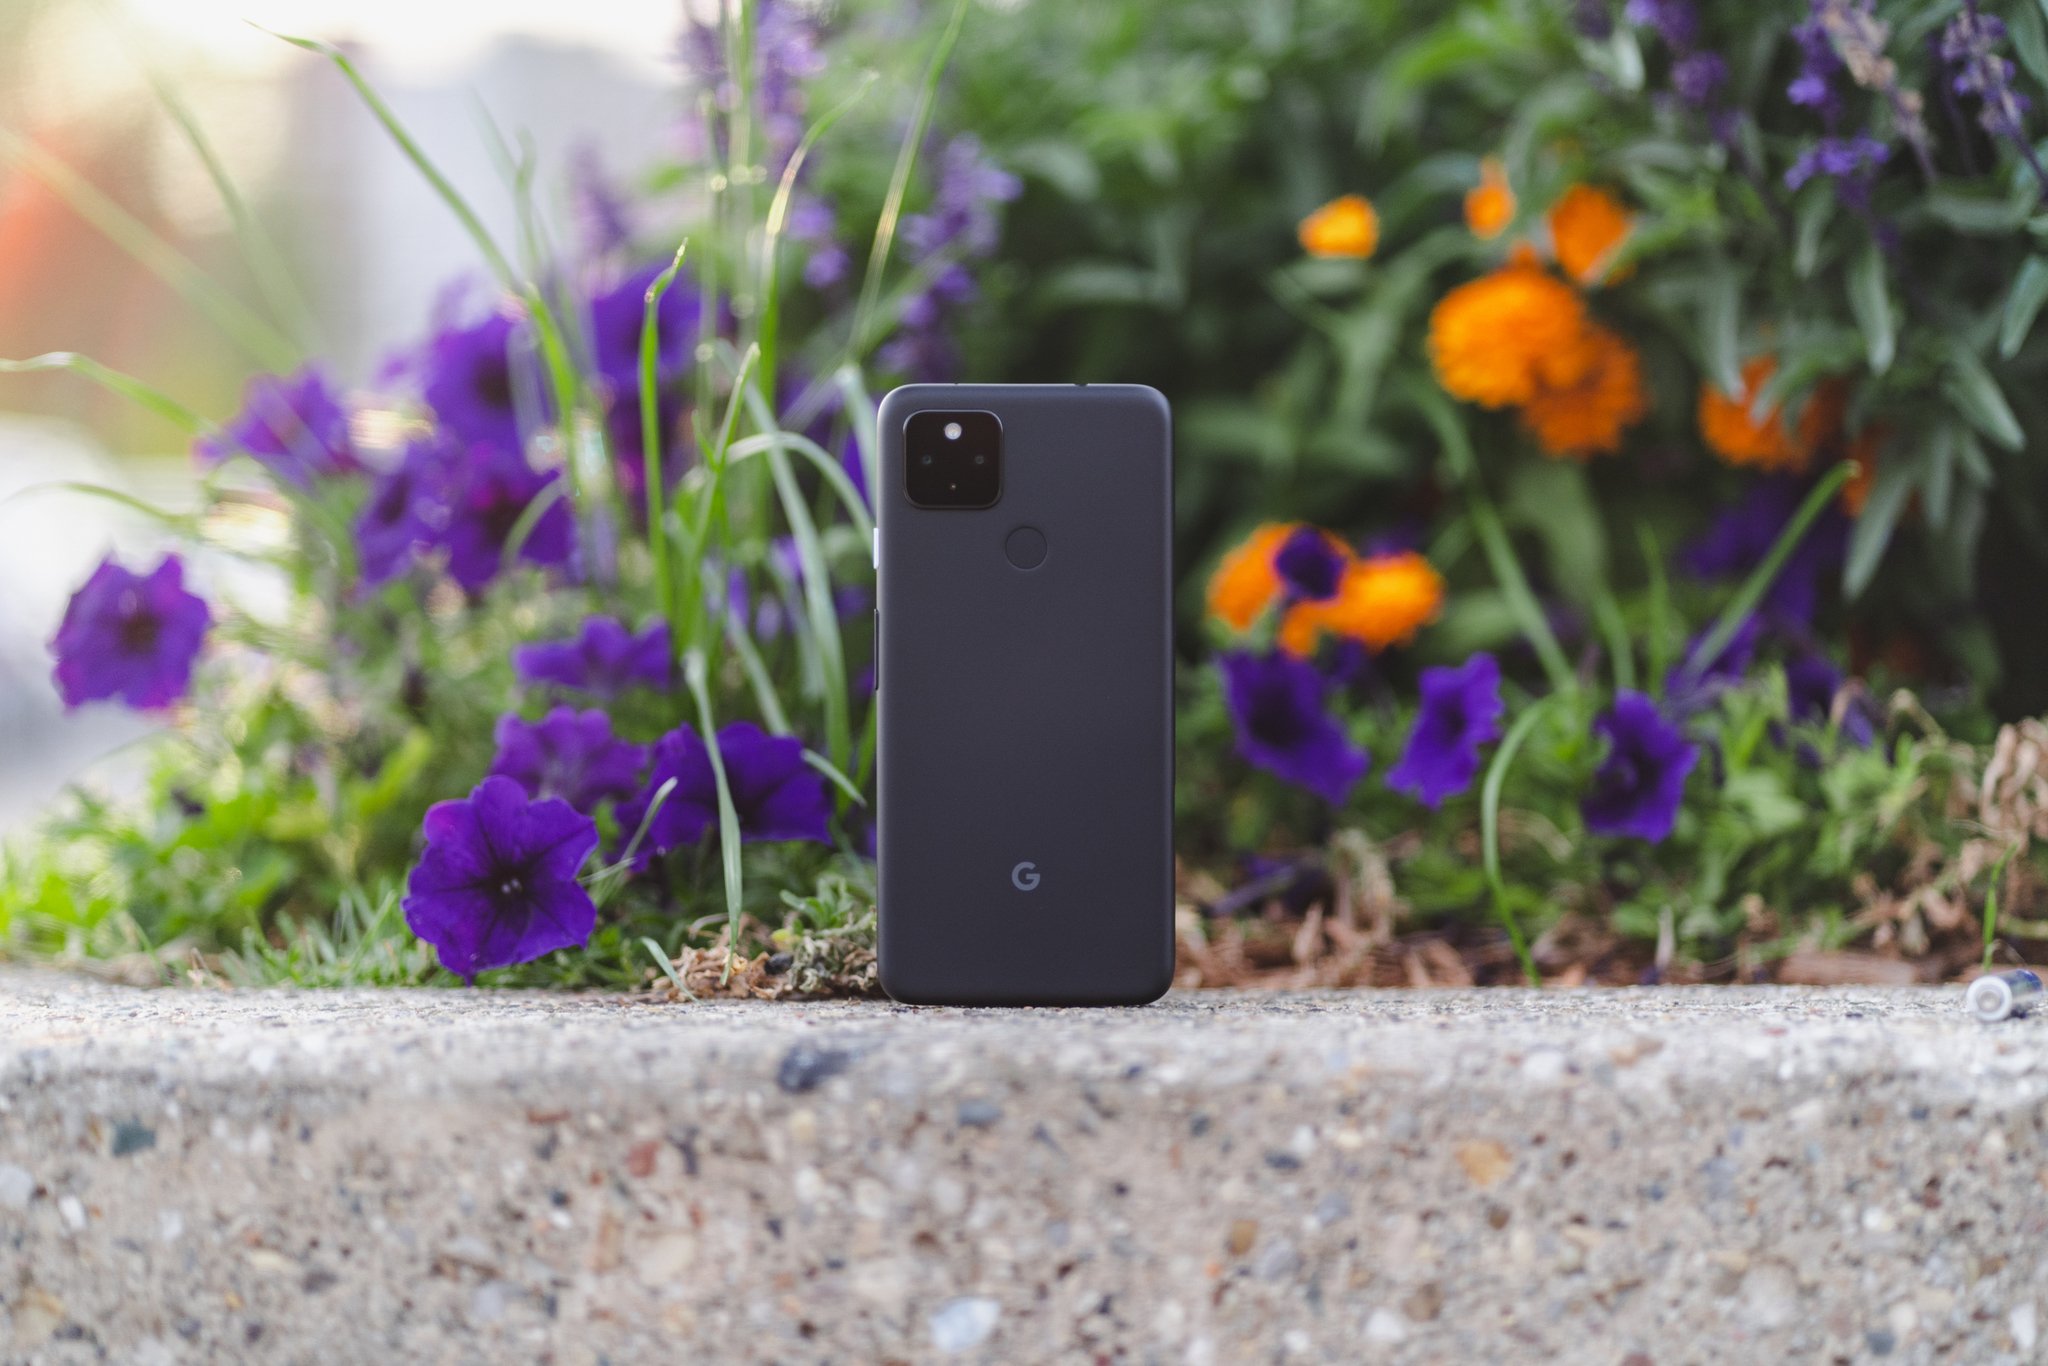 Google Pixel 4a 5G review: The best 5G phone value